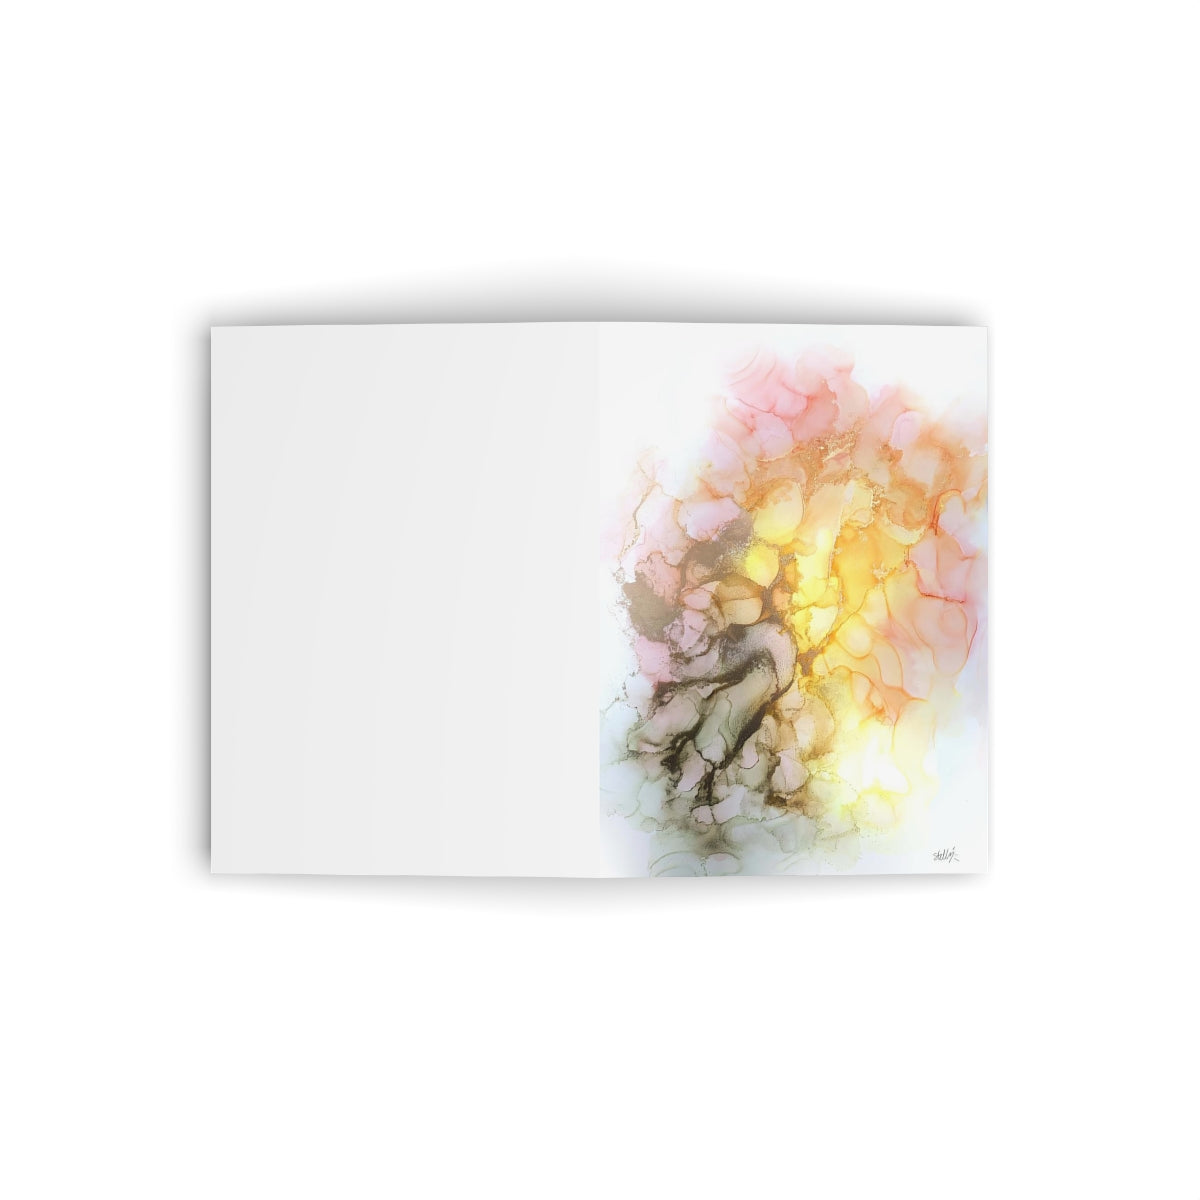 "Sun through the Clouds" Folded Greeting Card